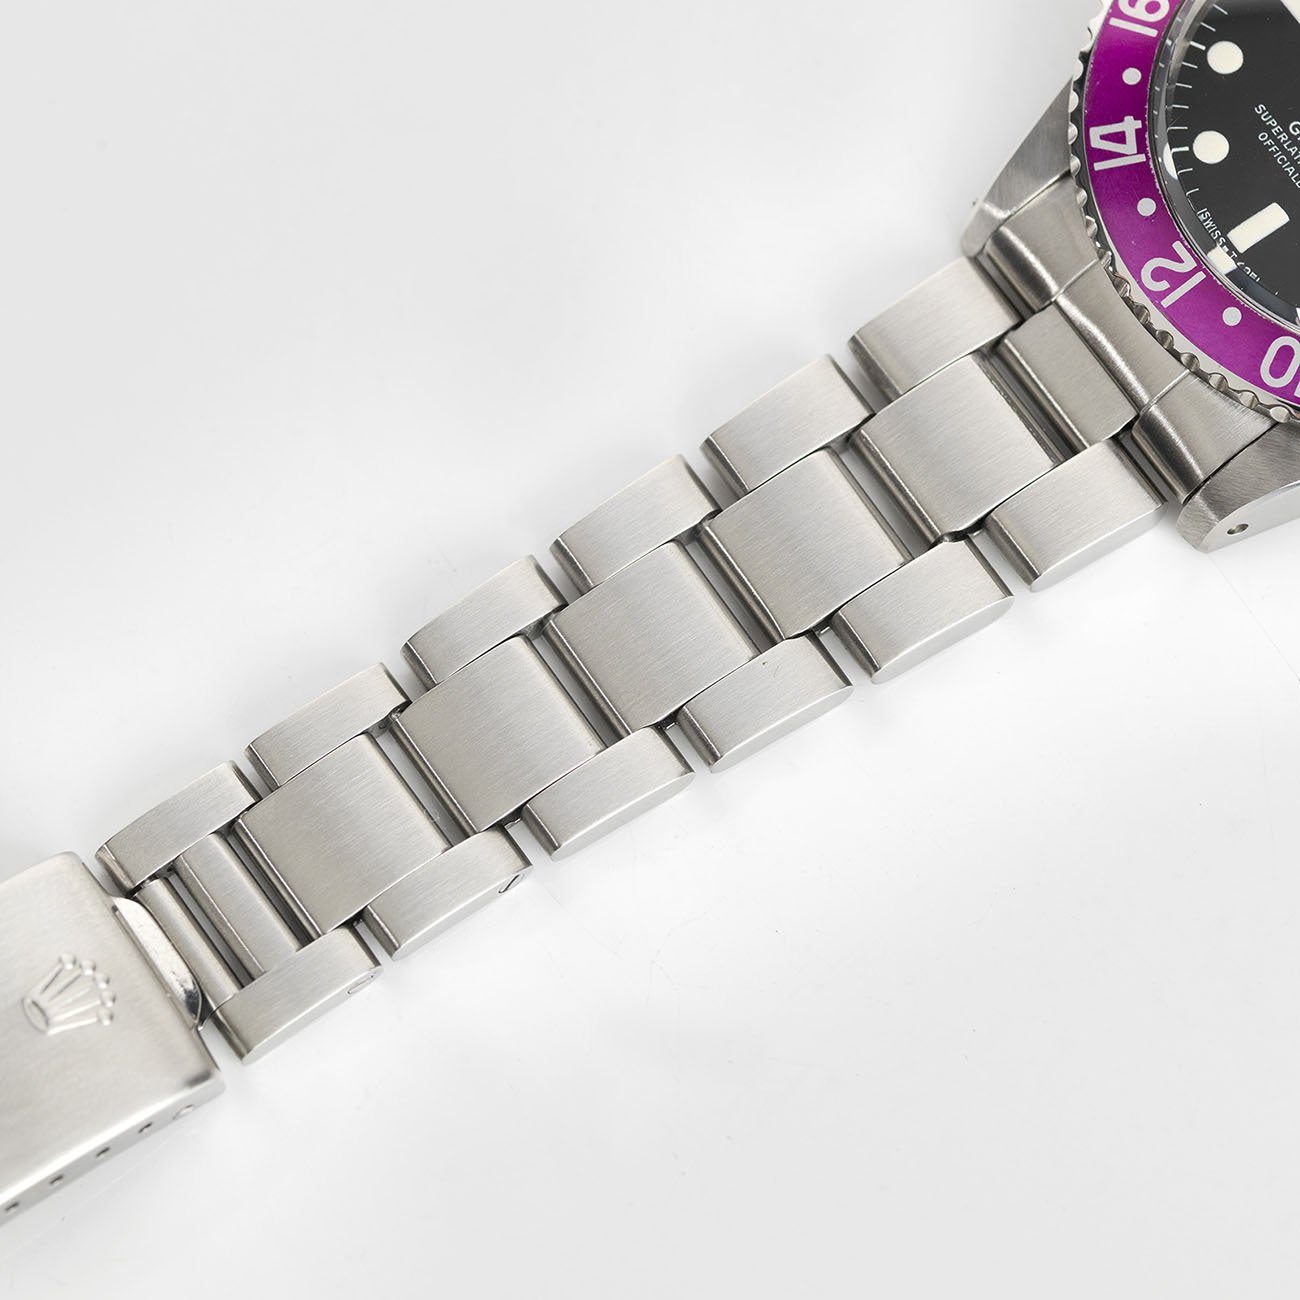 Rolex 1675 GMT Master Mk5 Maxi Dial Pink Lady